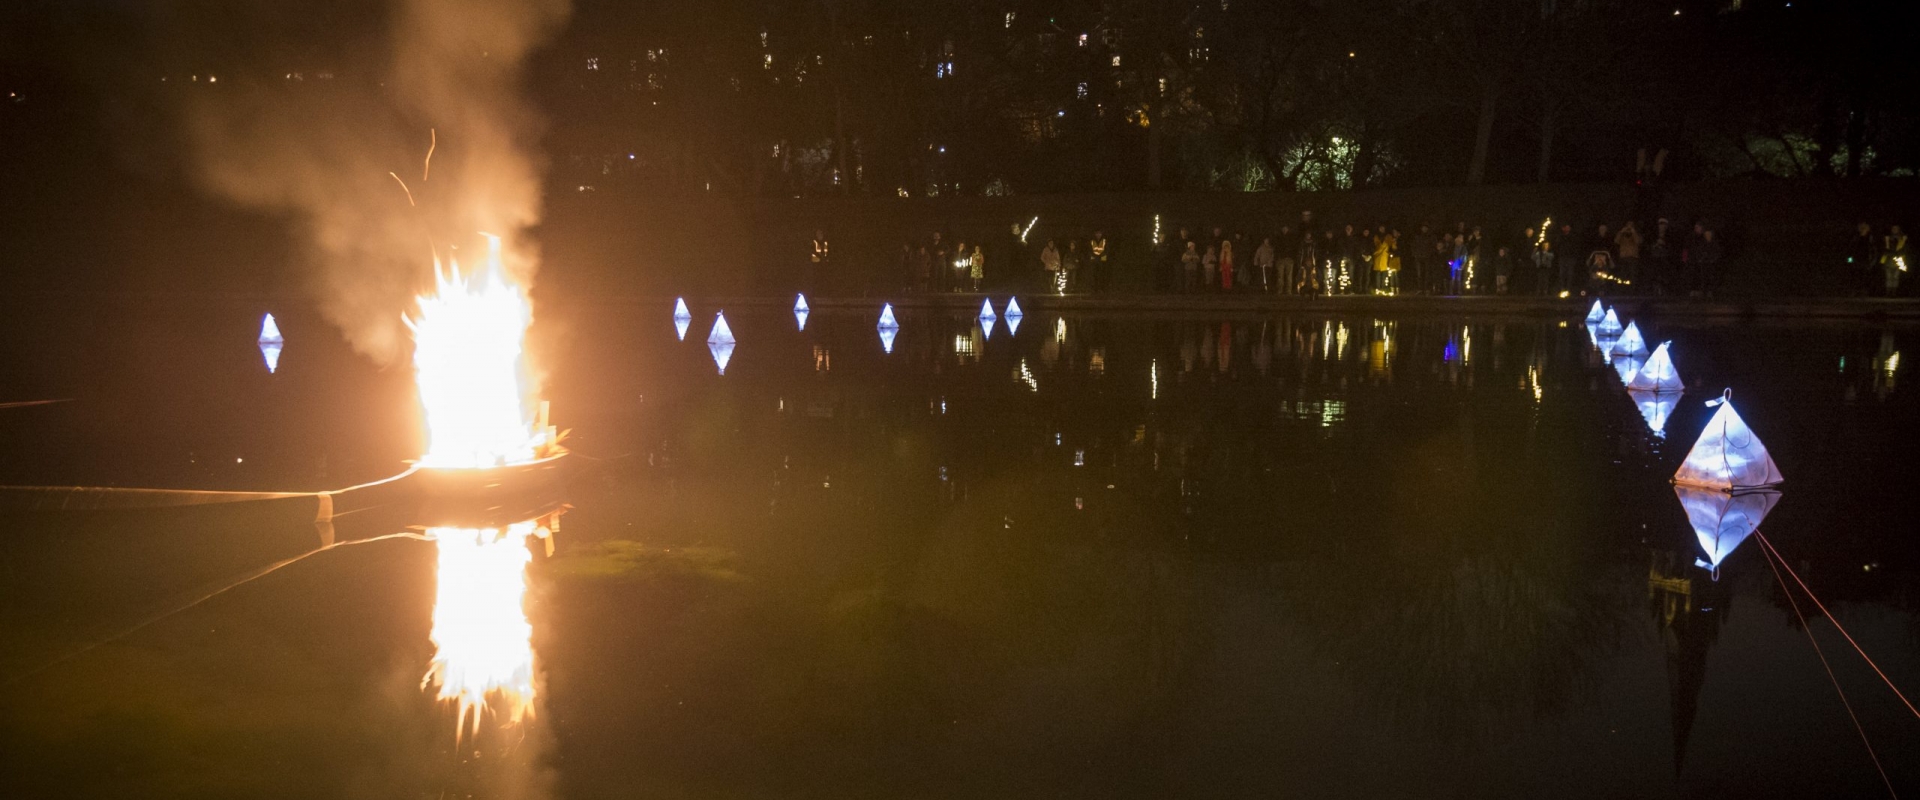 A cardboard ship aflame on the water as fireworks explode.